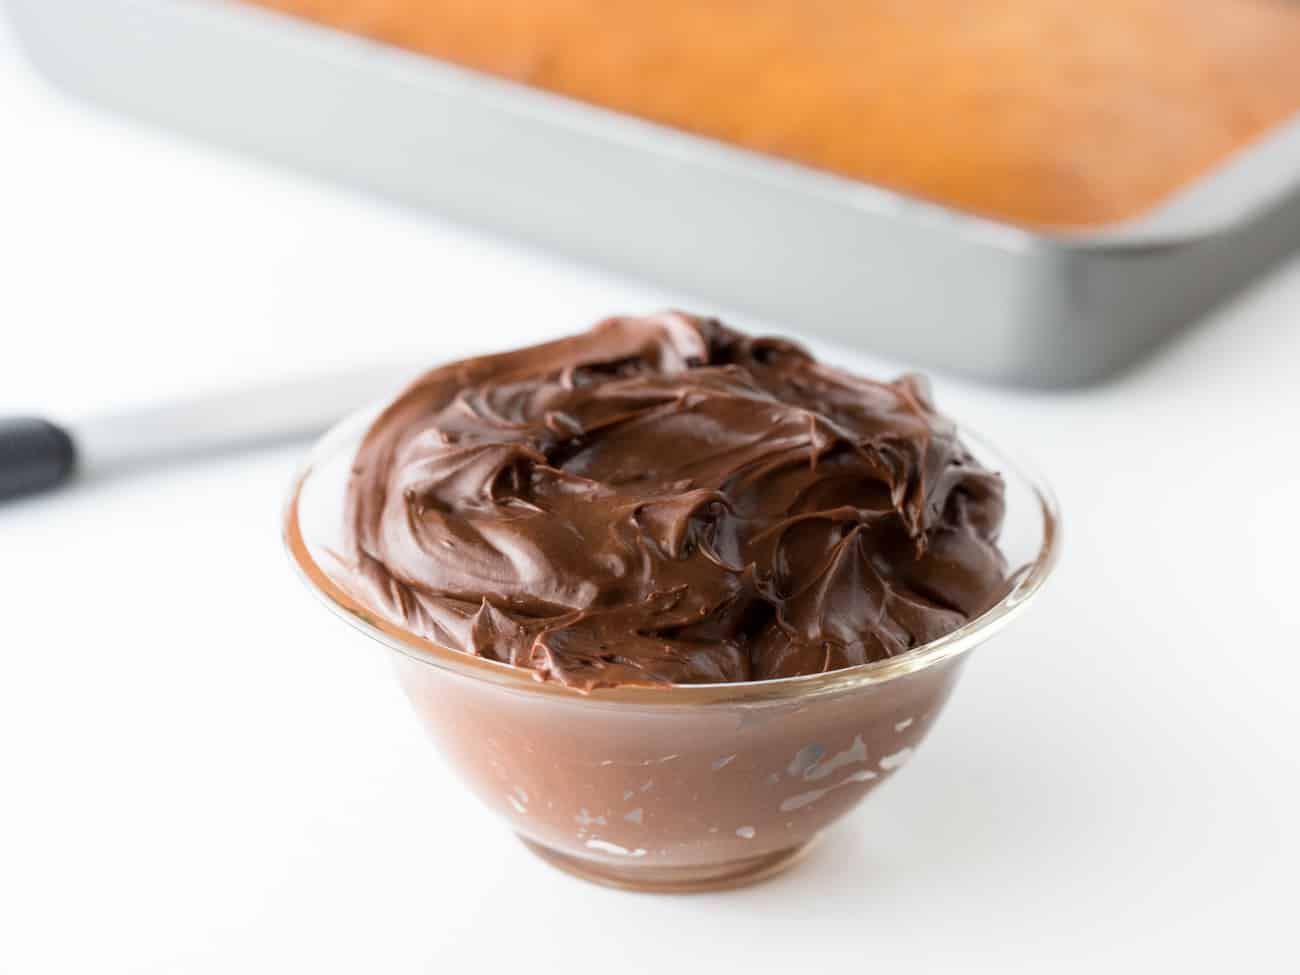 Plastic bowl of easy chocolate frosting with chocolate spreader and 9x13 yellow cake in background.